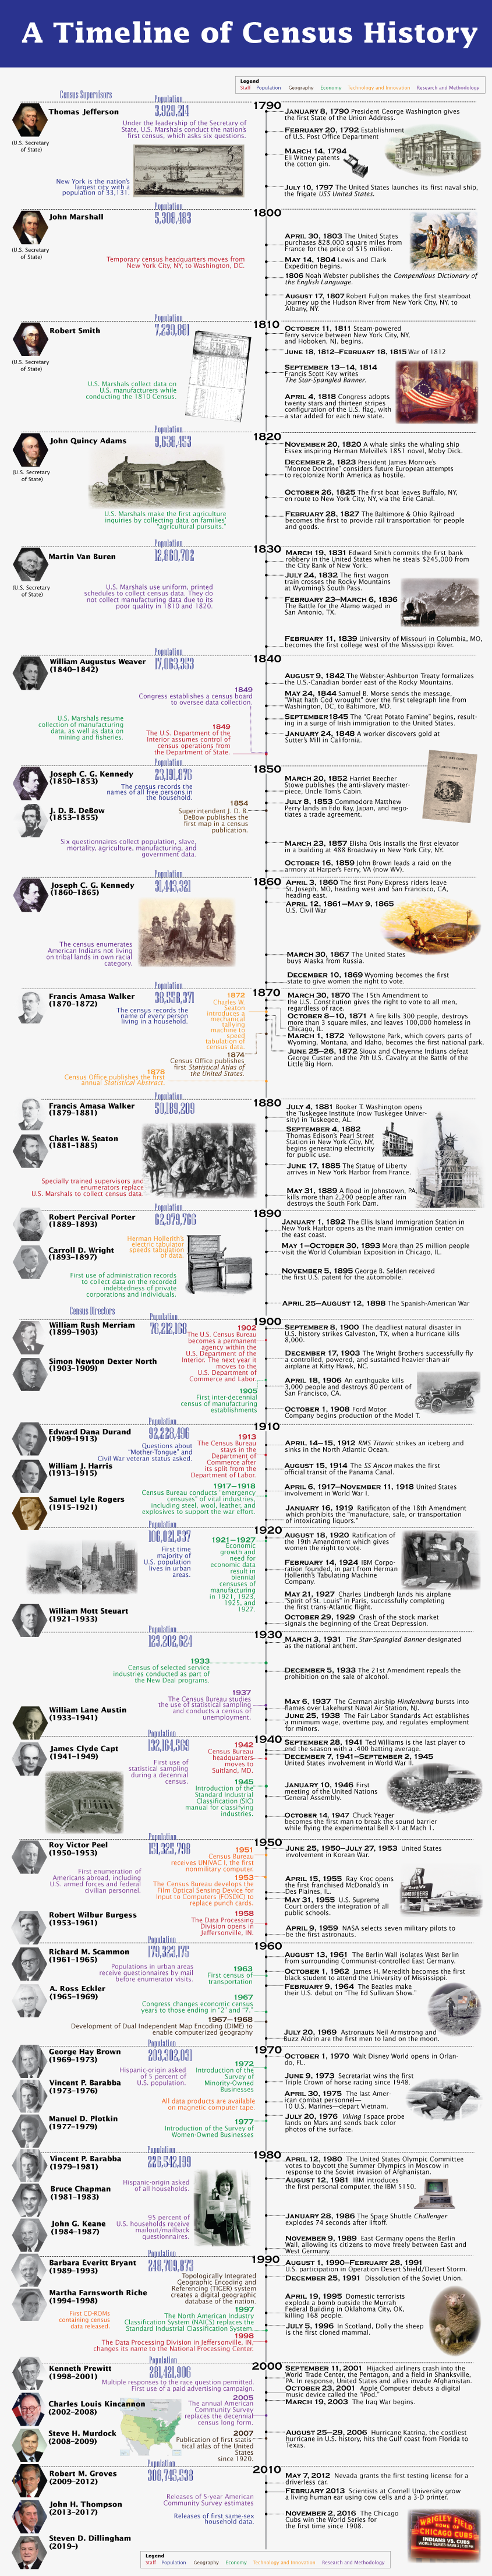 A Timeline of Census History